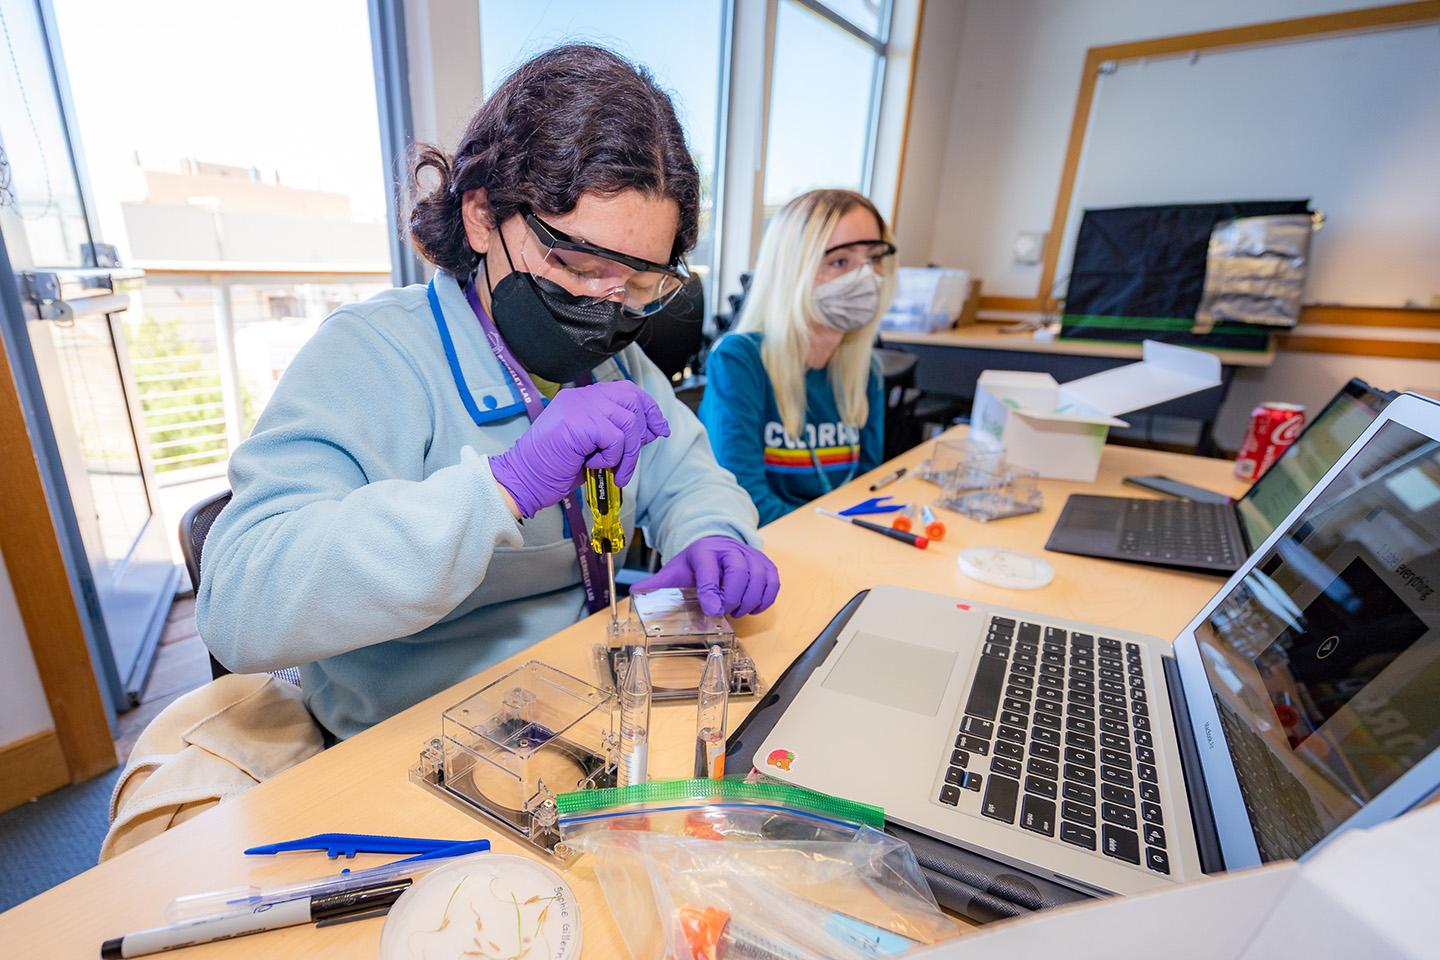 A masked student with dark hair, glasses, and purple latex gloves uses a screwdriver to put together an EcoFAB device.